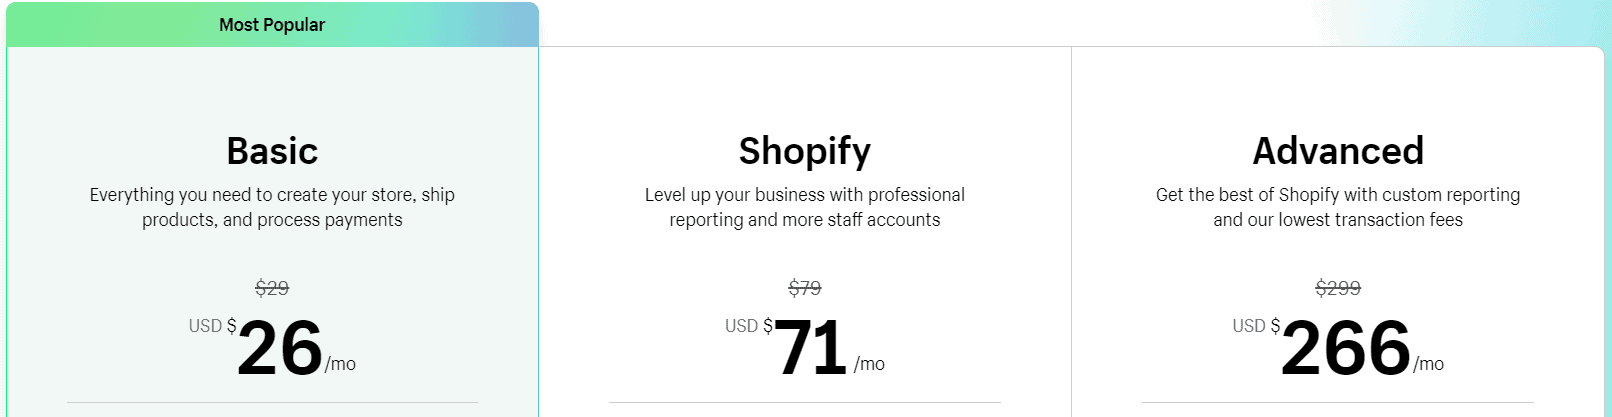 SHOPIFY PRICING